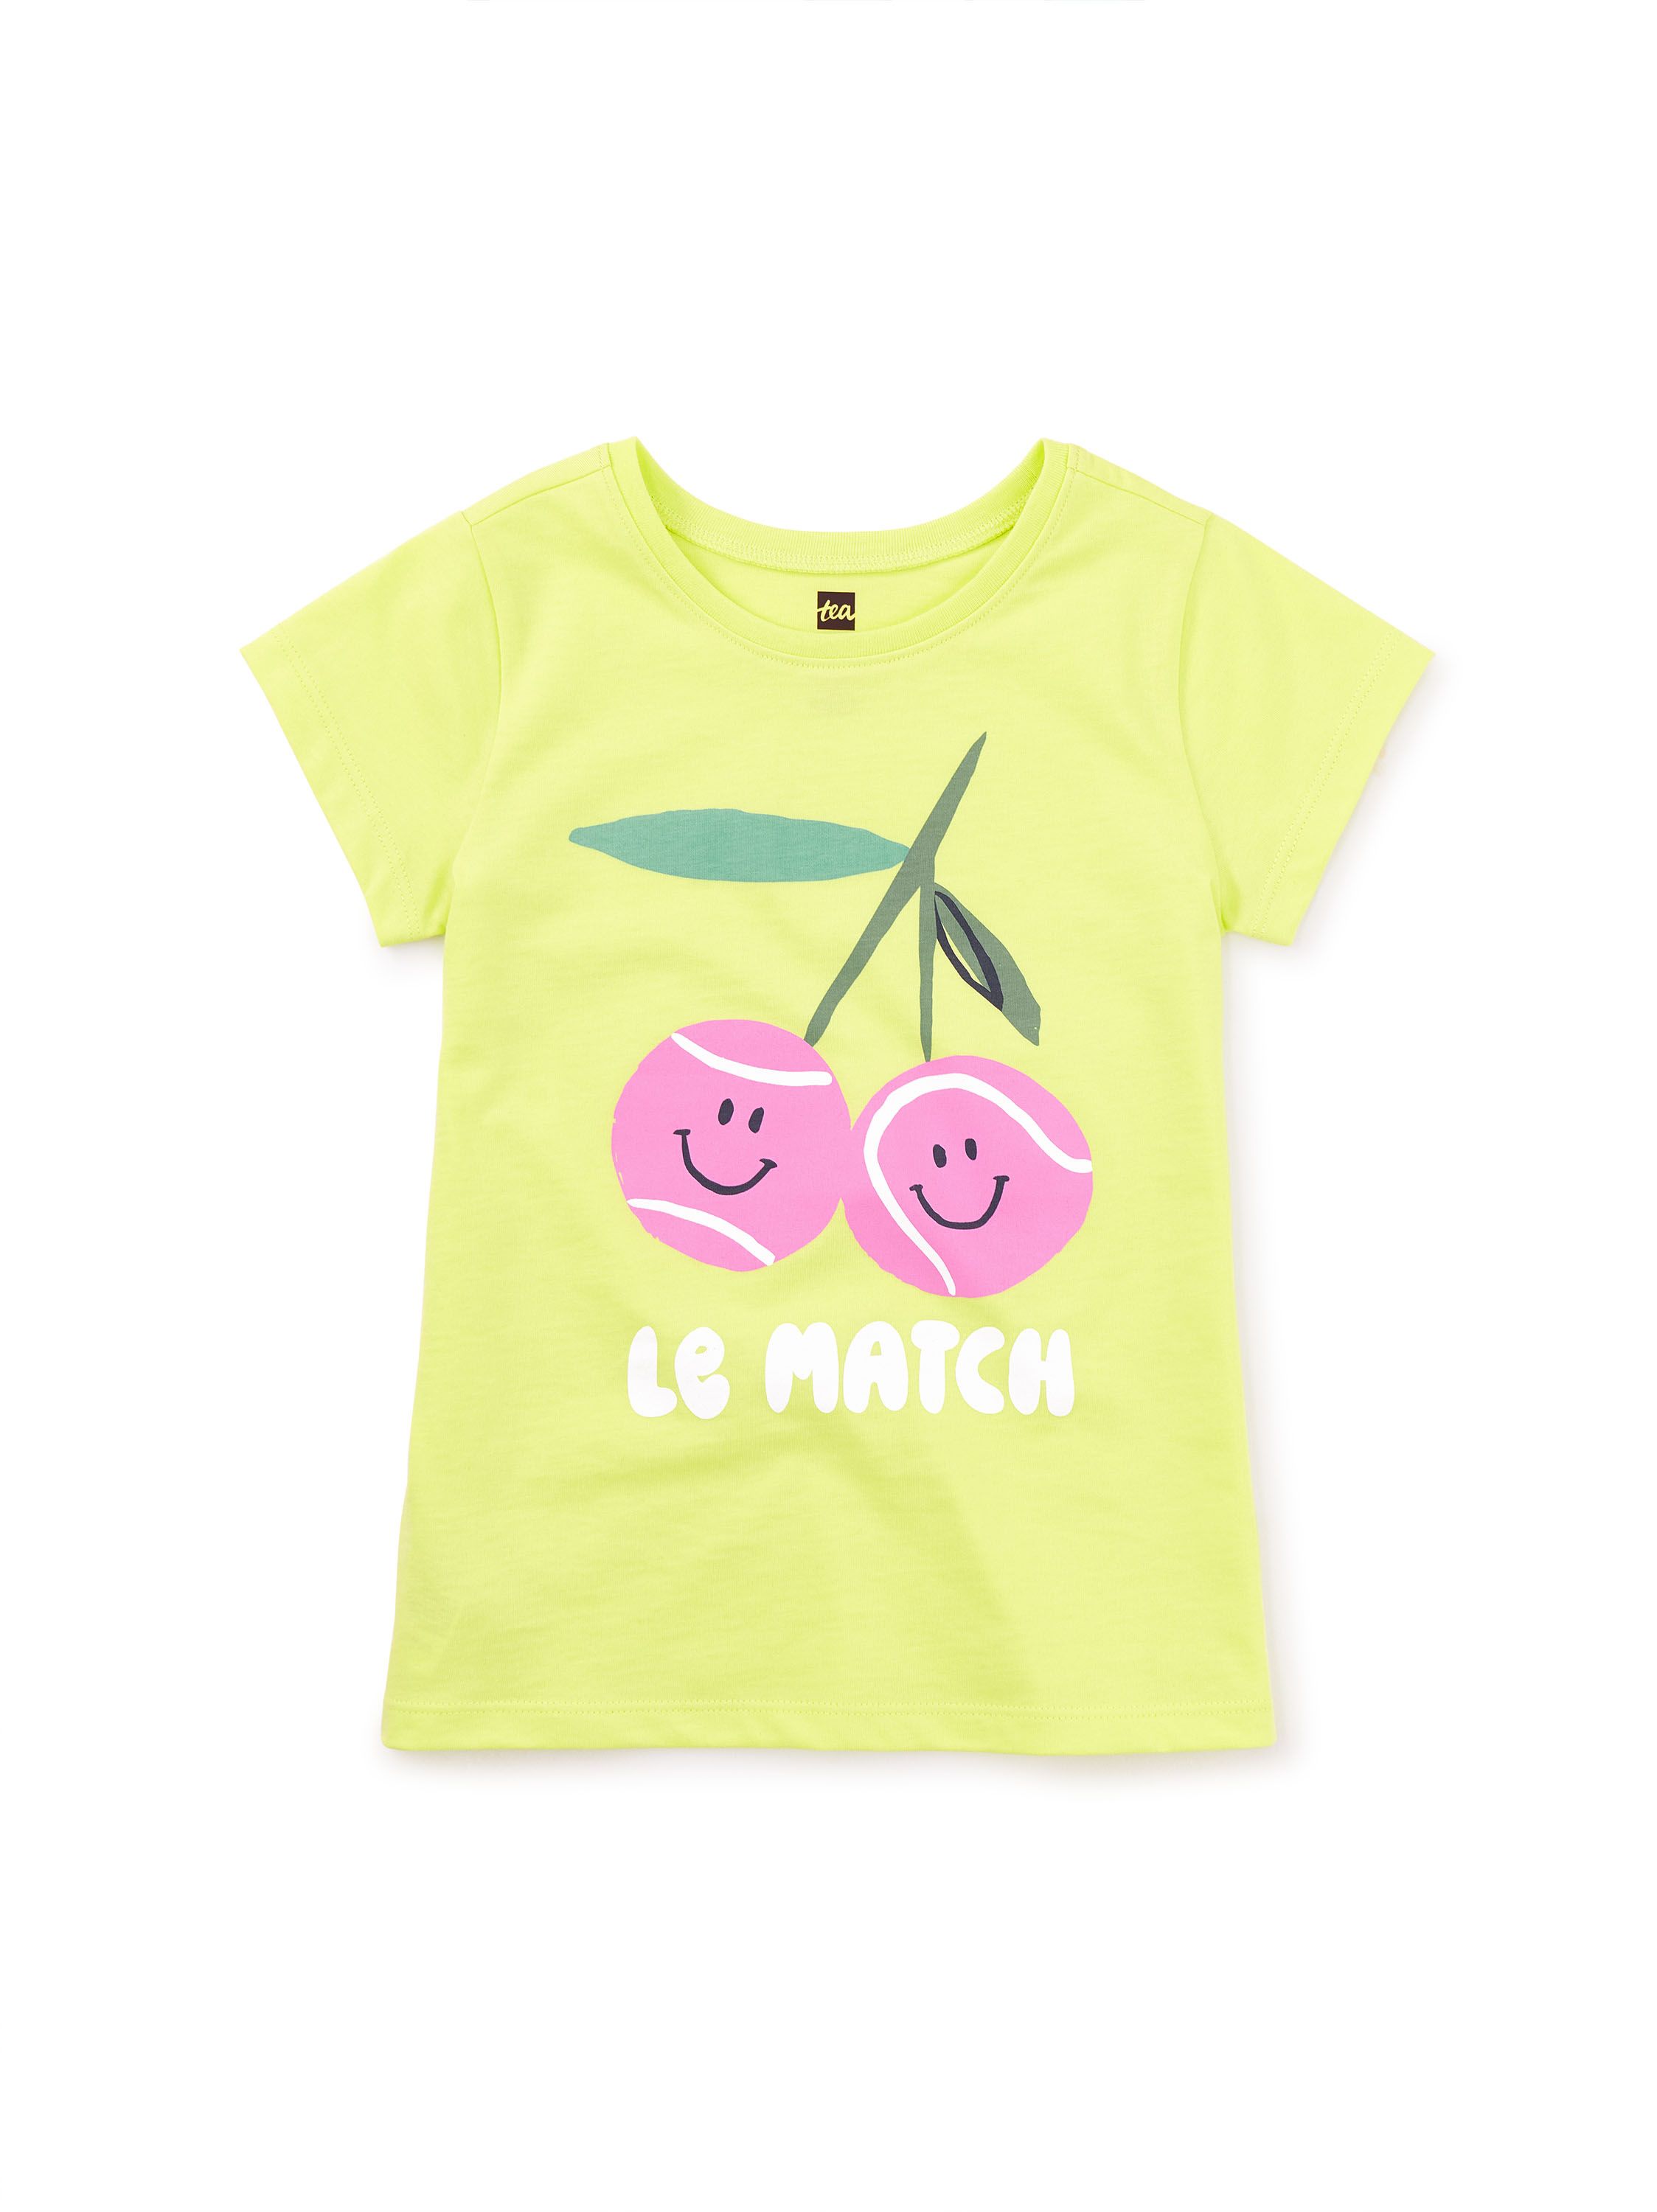 Le Match Graphic Tee | Tea Collection